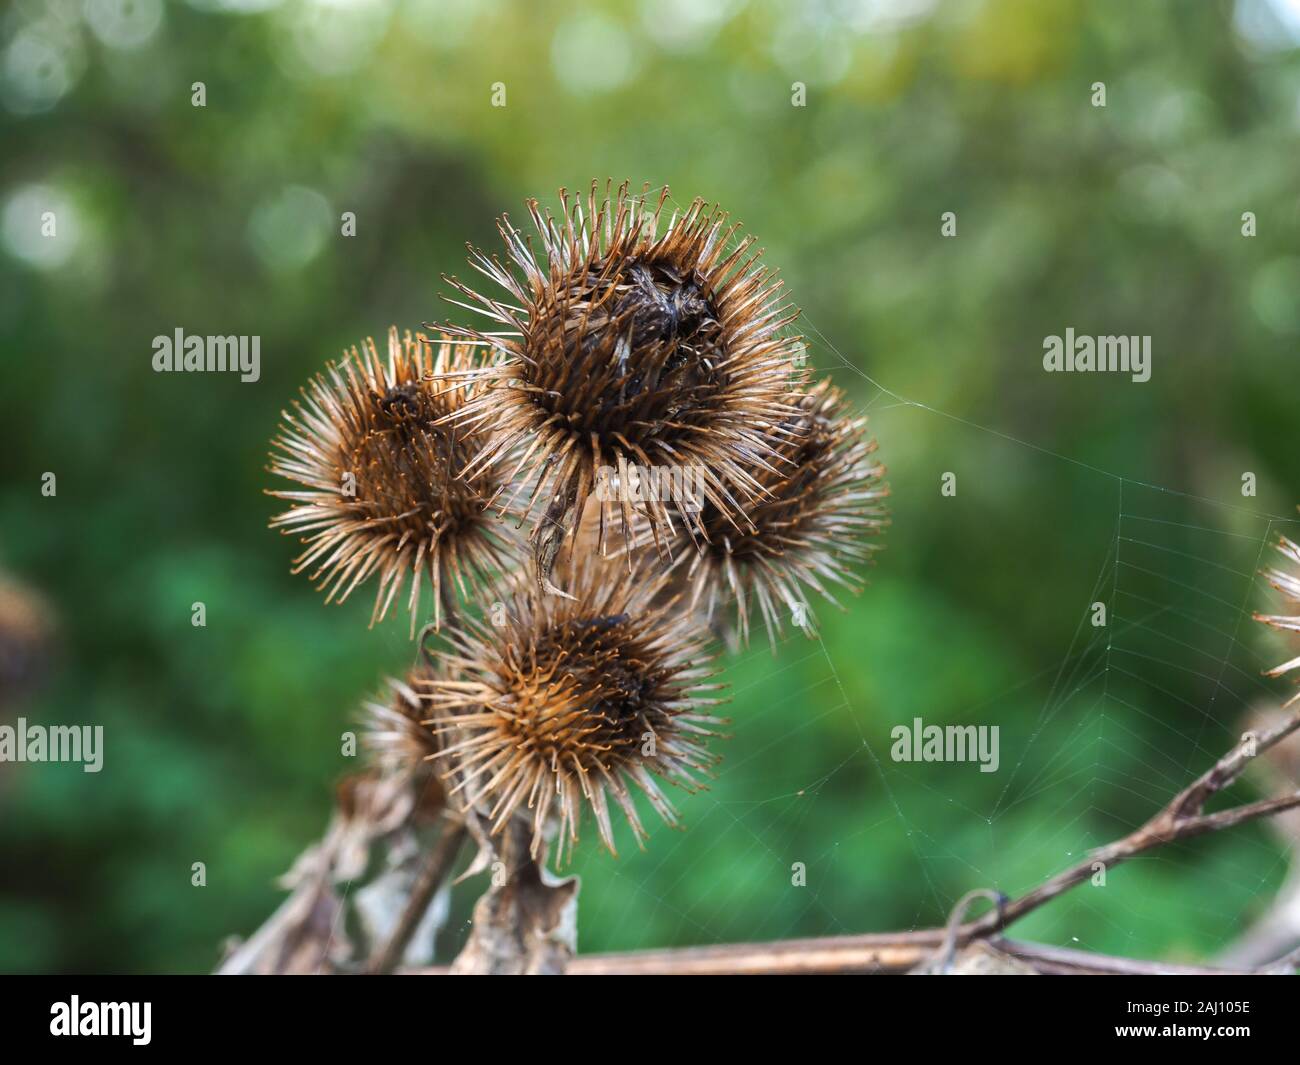 Finished flowers and green leaves of burdock, Arctium, in autumn in North Yorkshire, England Stock Photo